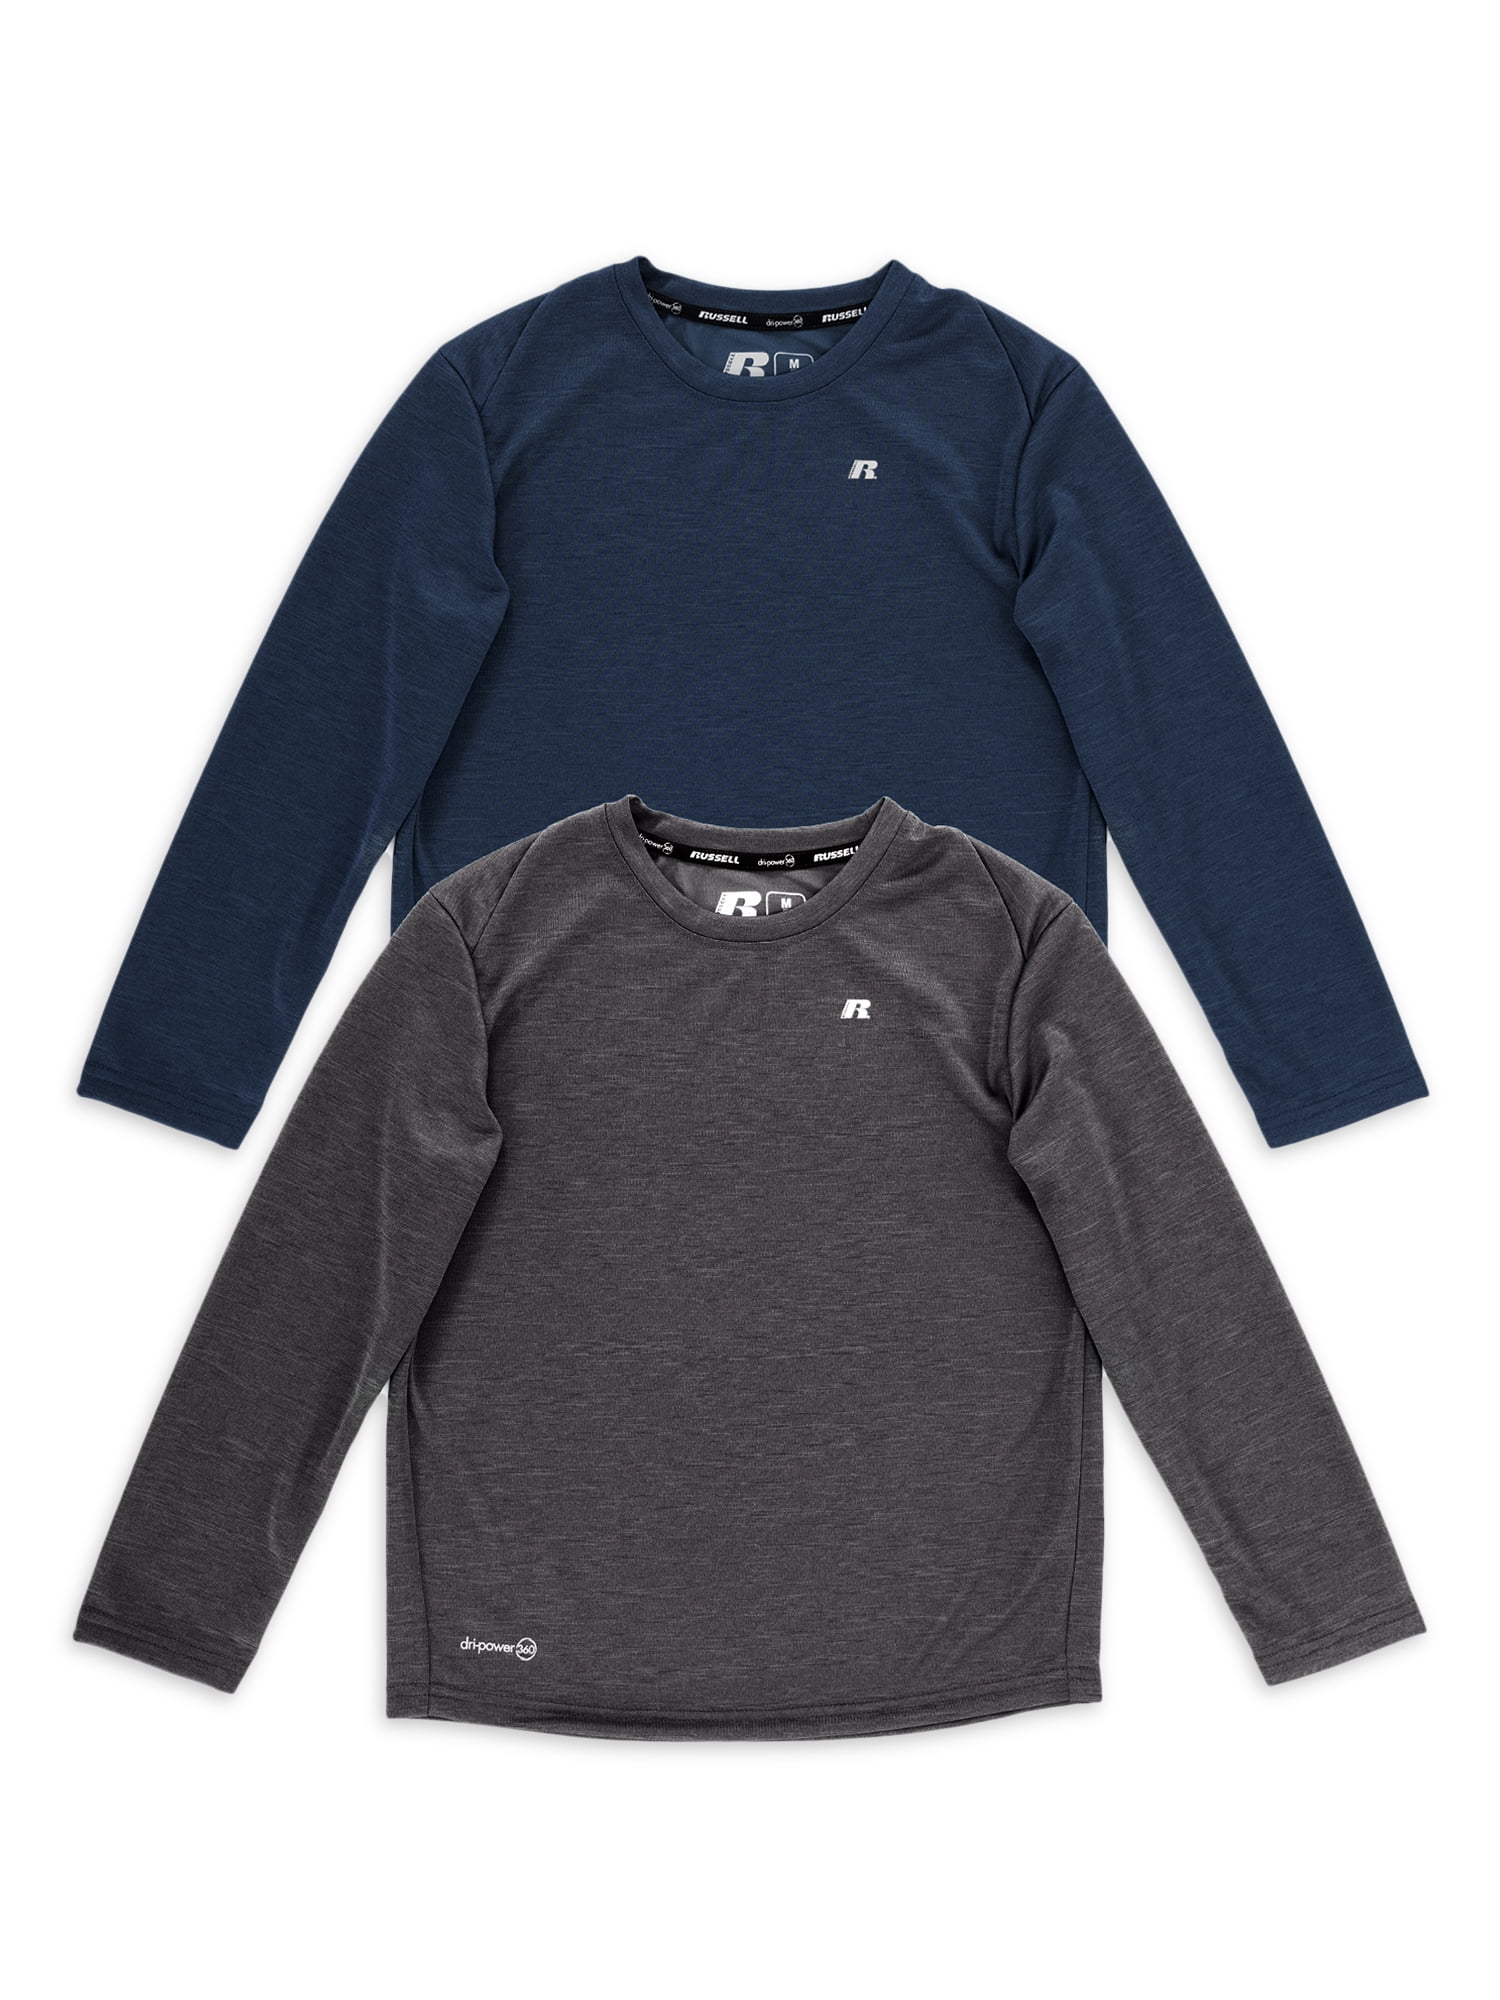 Russell Boys Fresh Force Athletic Long Sleeve Recycled T-Shirts, 2-Pack,  Sizes 4-18 & Husky 